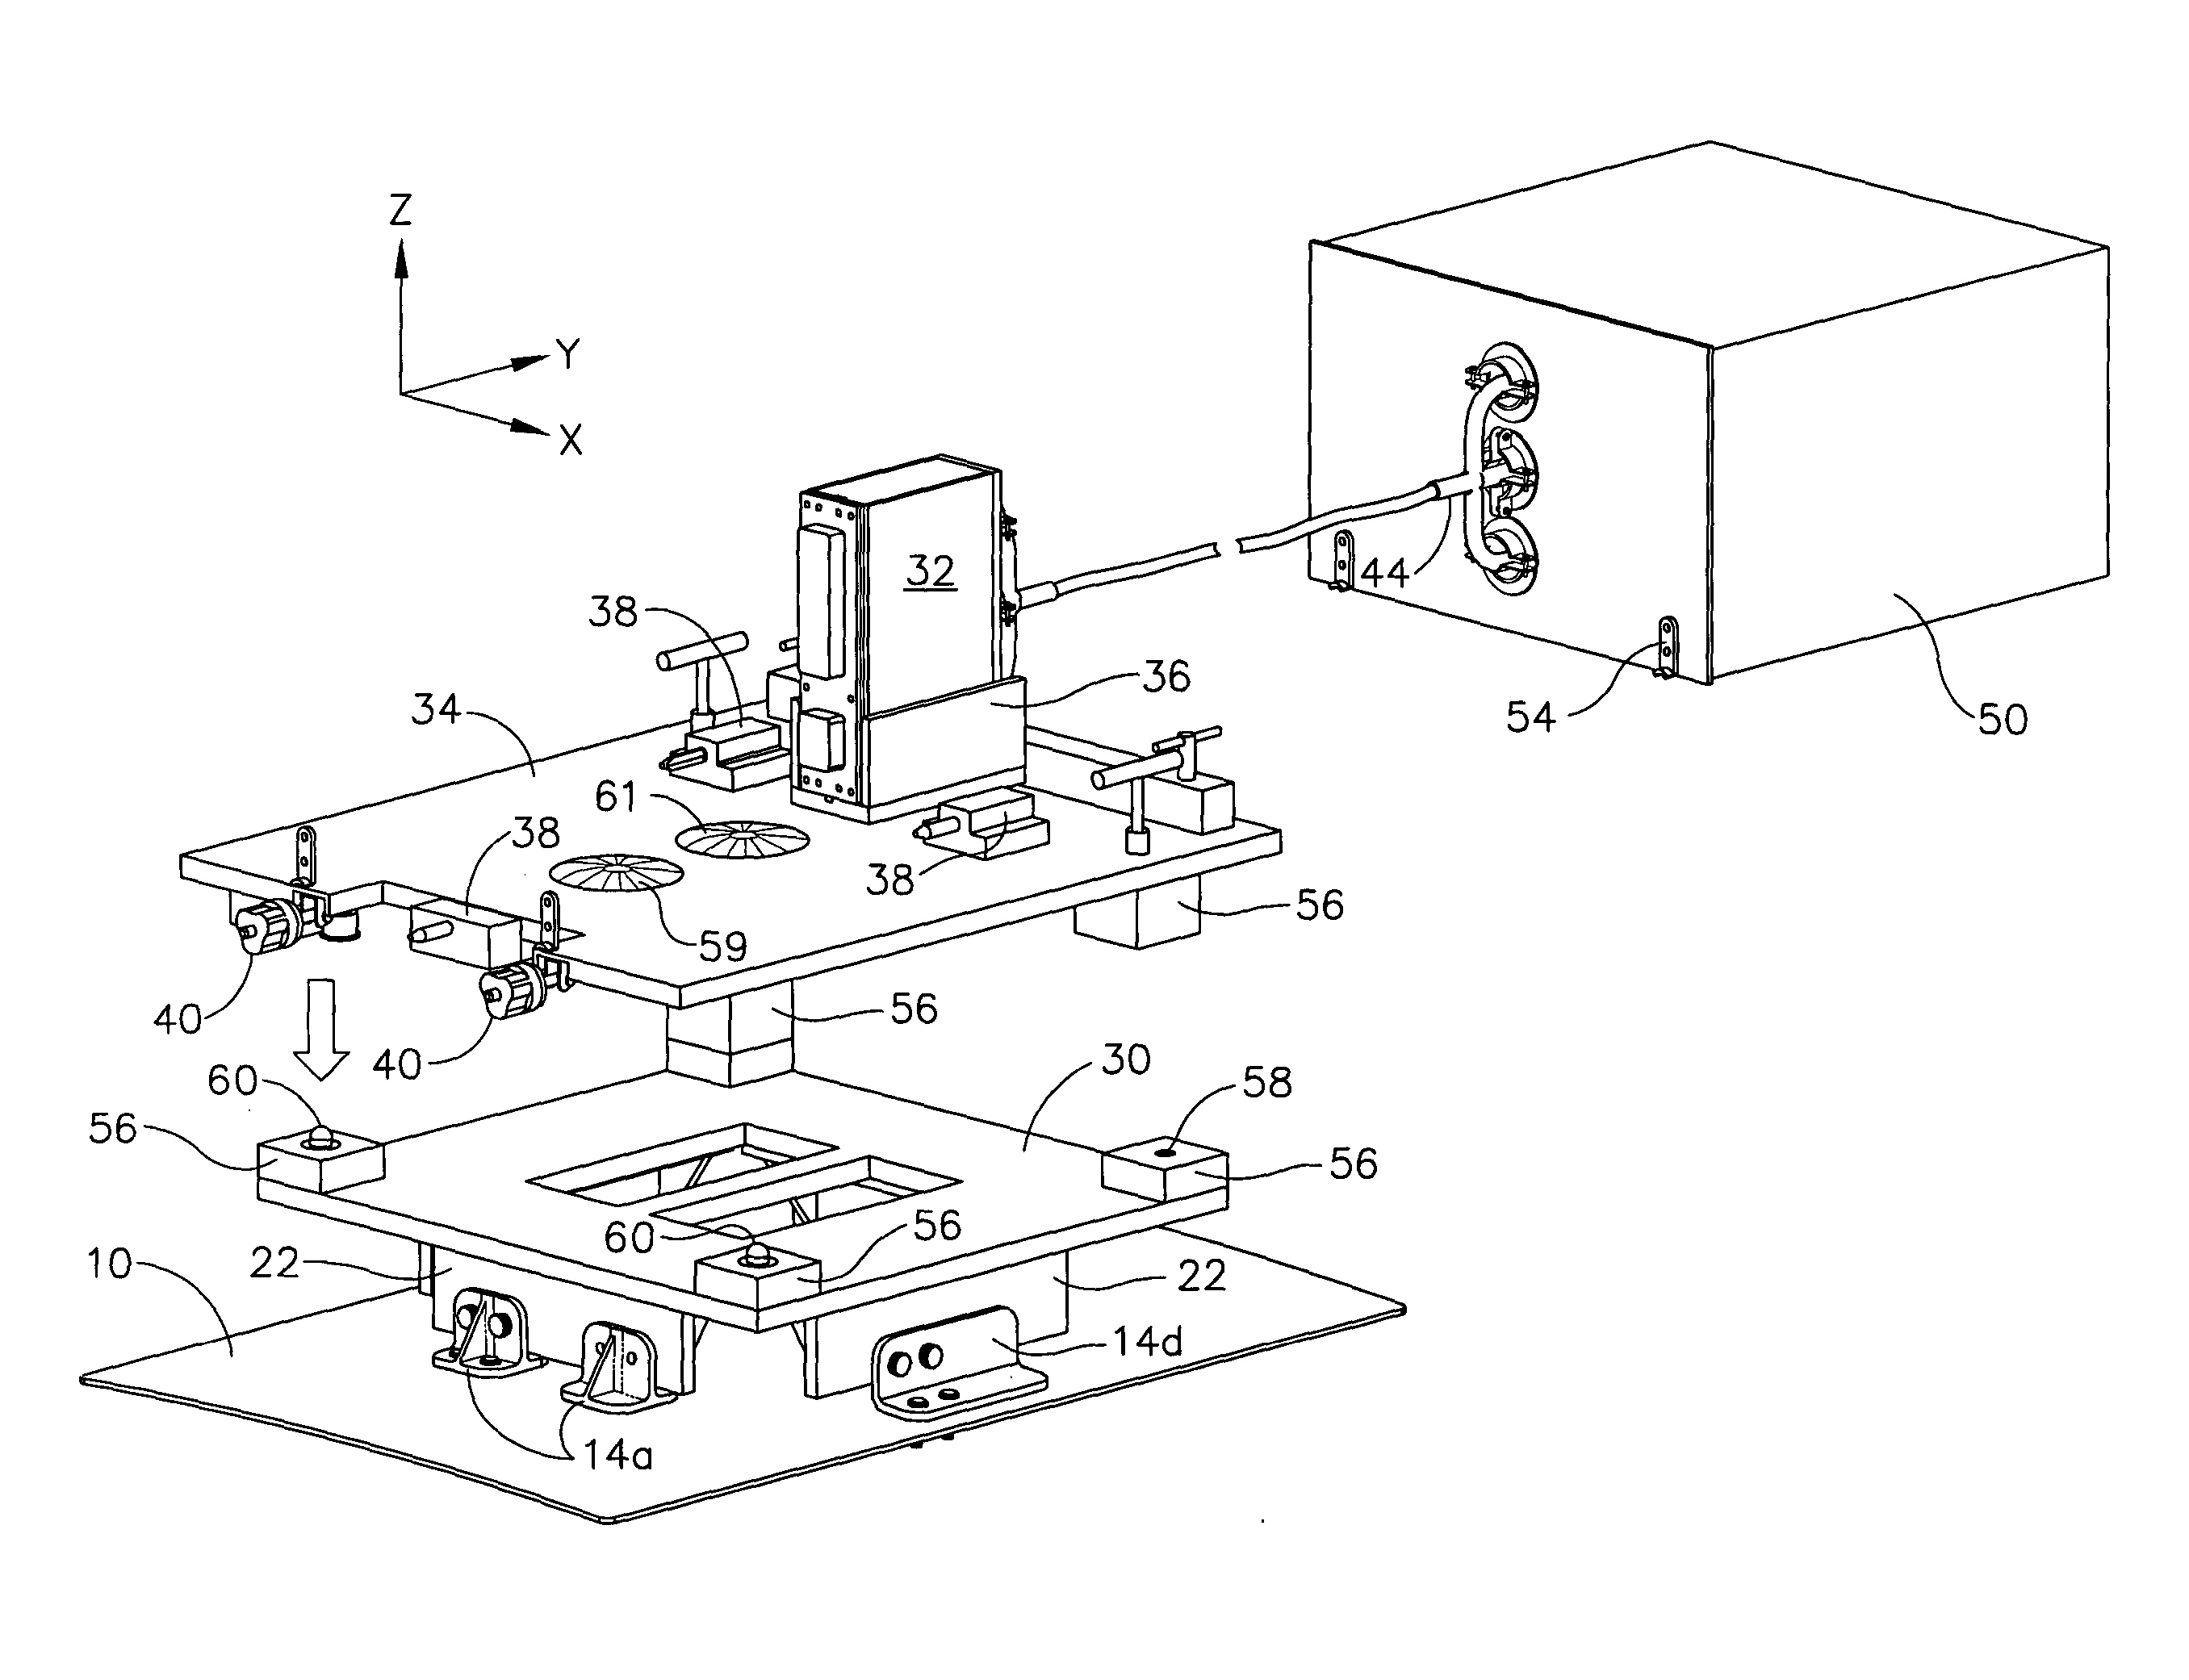 Method and apparatus to align auxiliary aircraft equipment attitude and heading